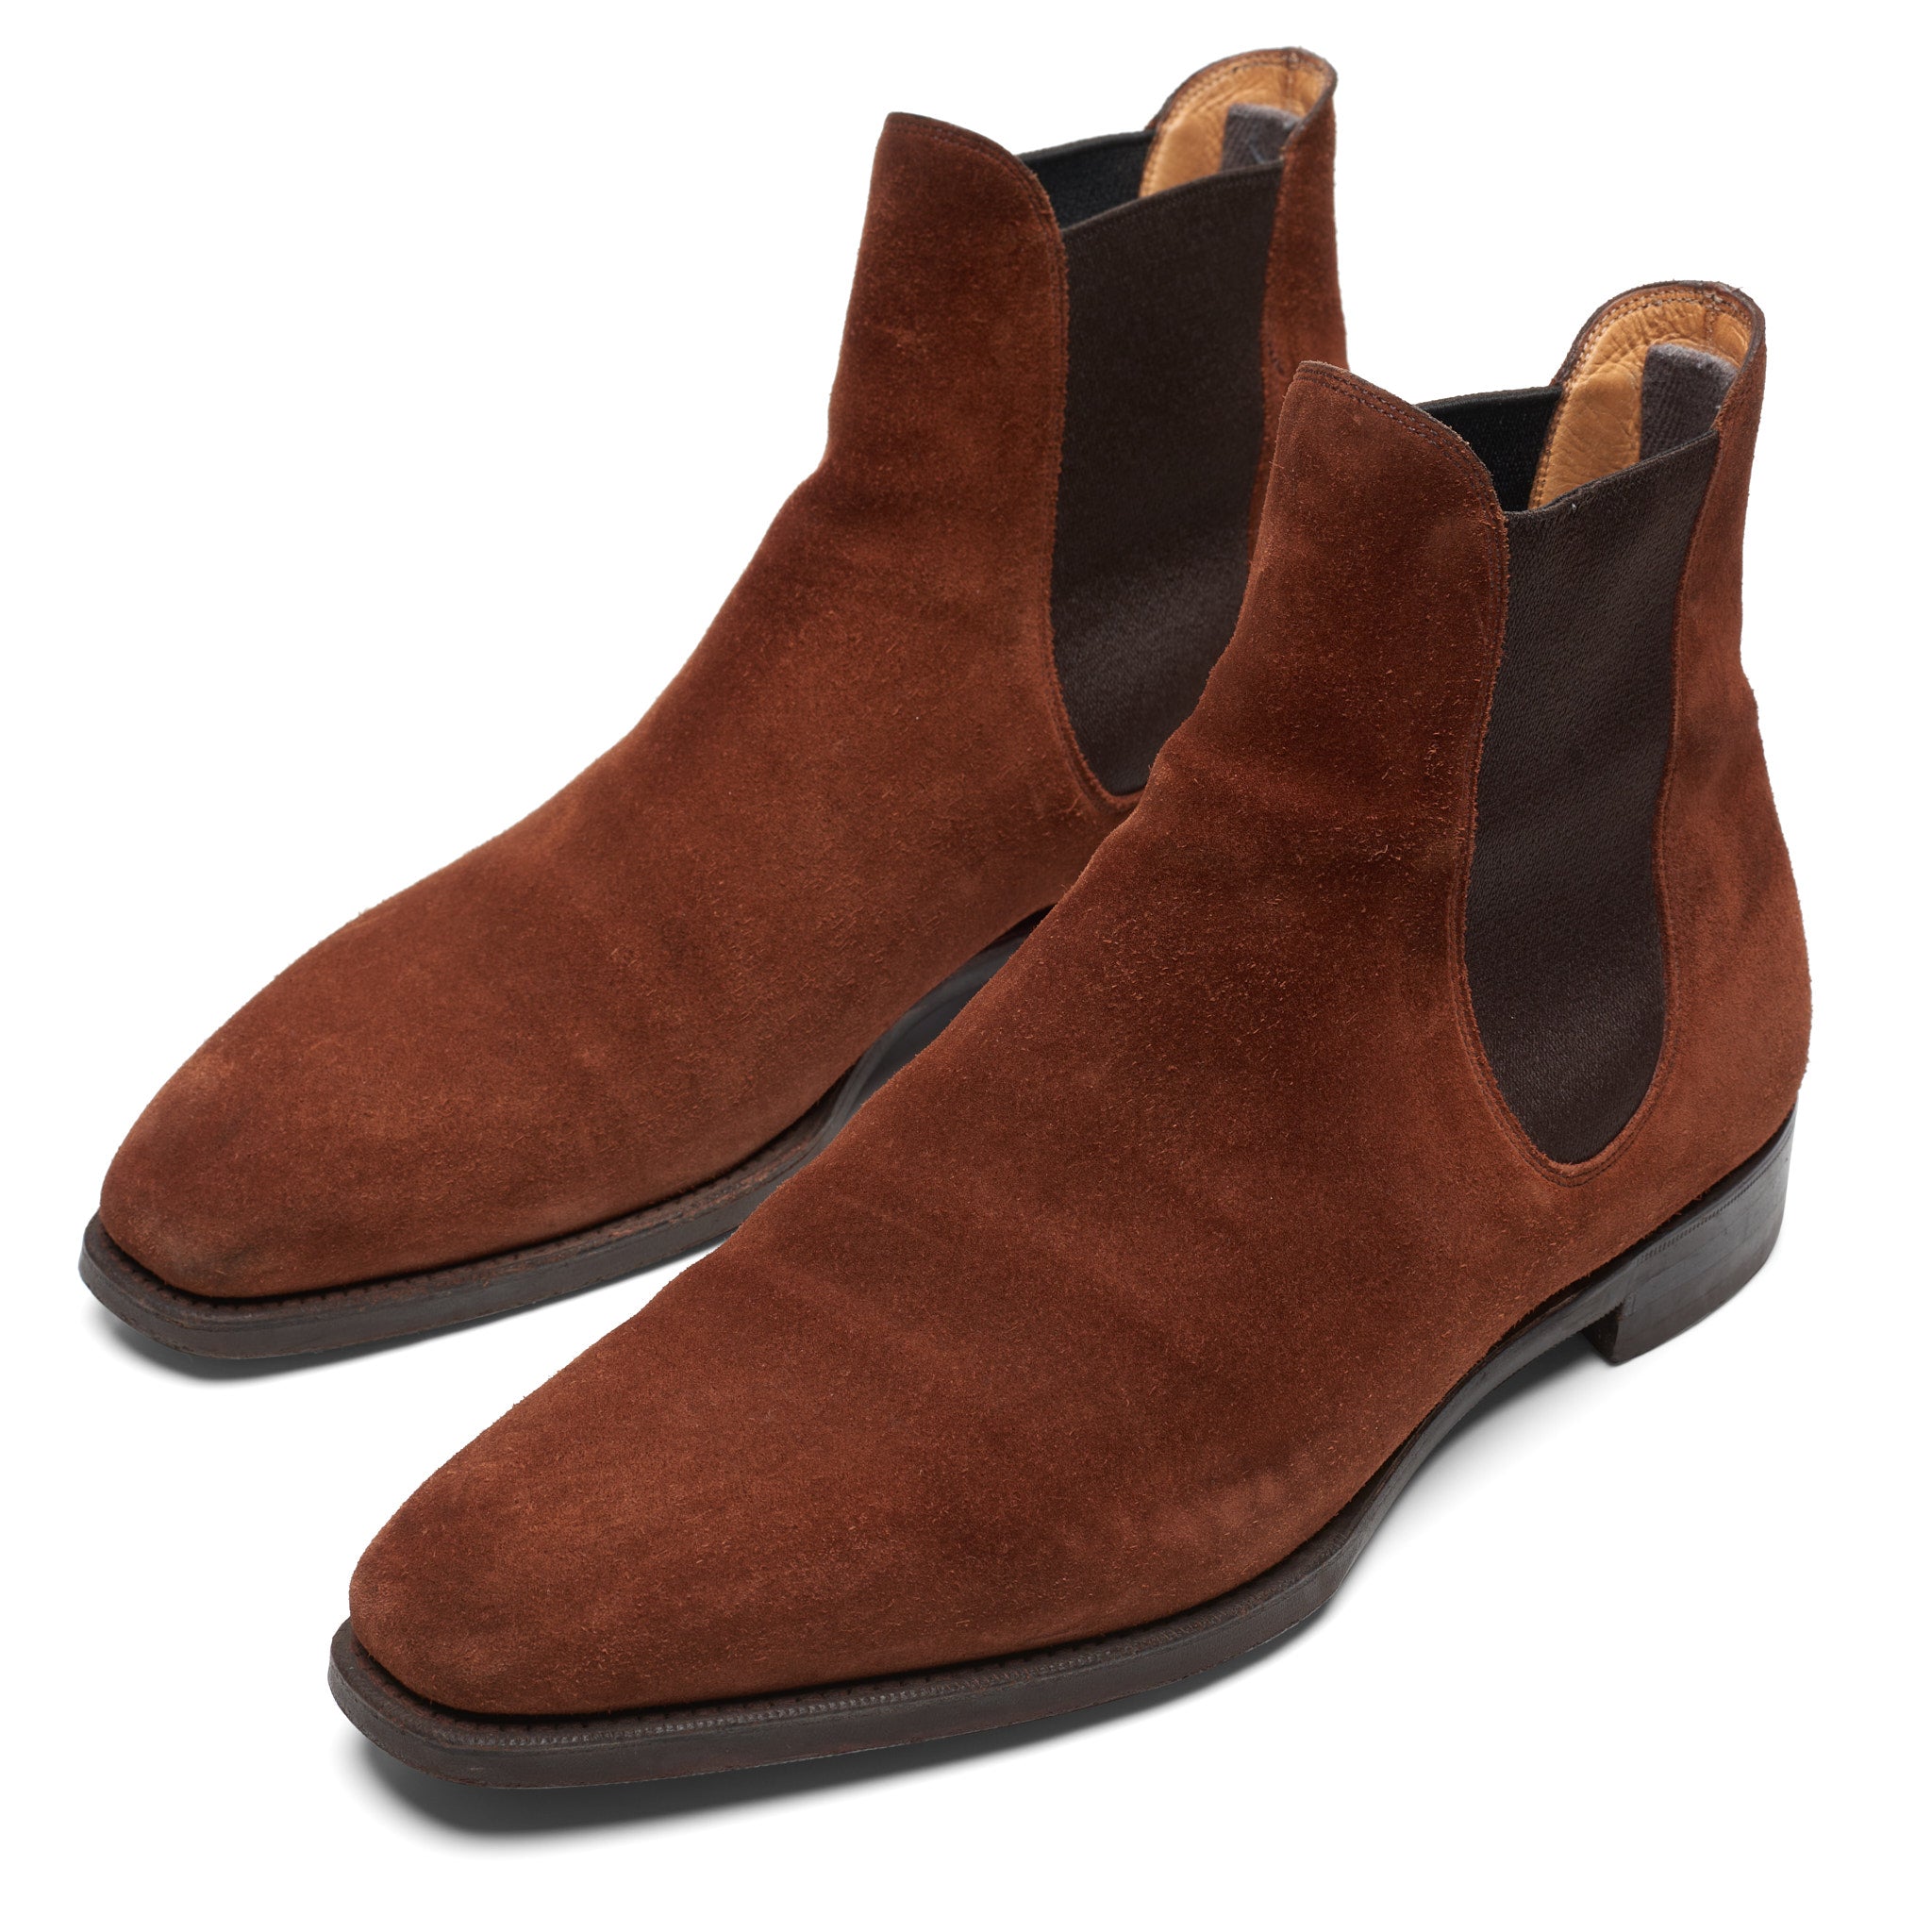 GAZIANO & GIRLING "Burnham" Polo Suede Leather Chelsea Boots UK 8E US 8.5 Last MH71 GAZIANO & GIRLING